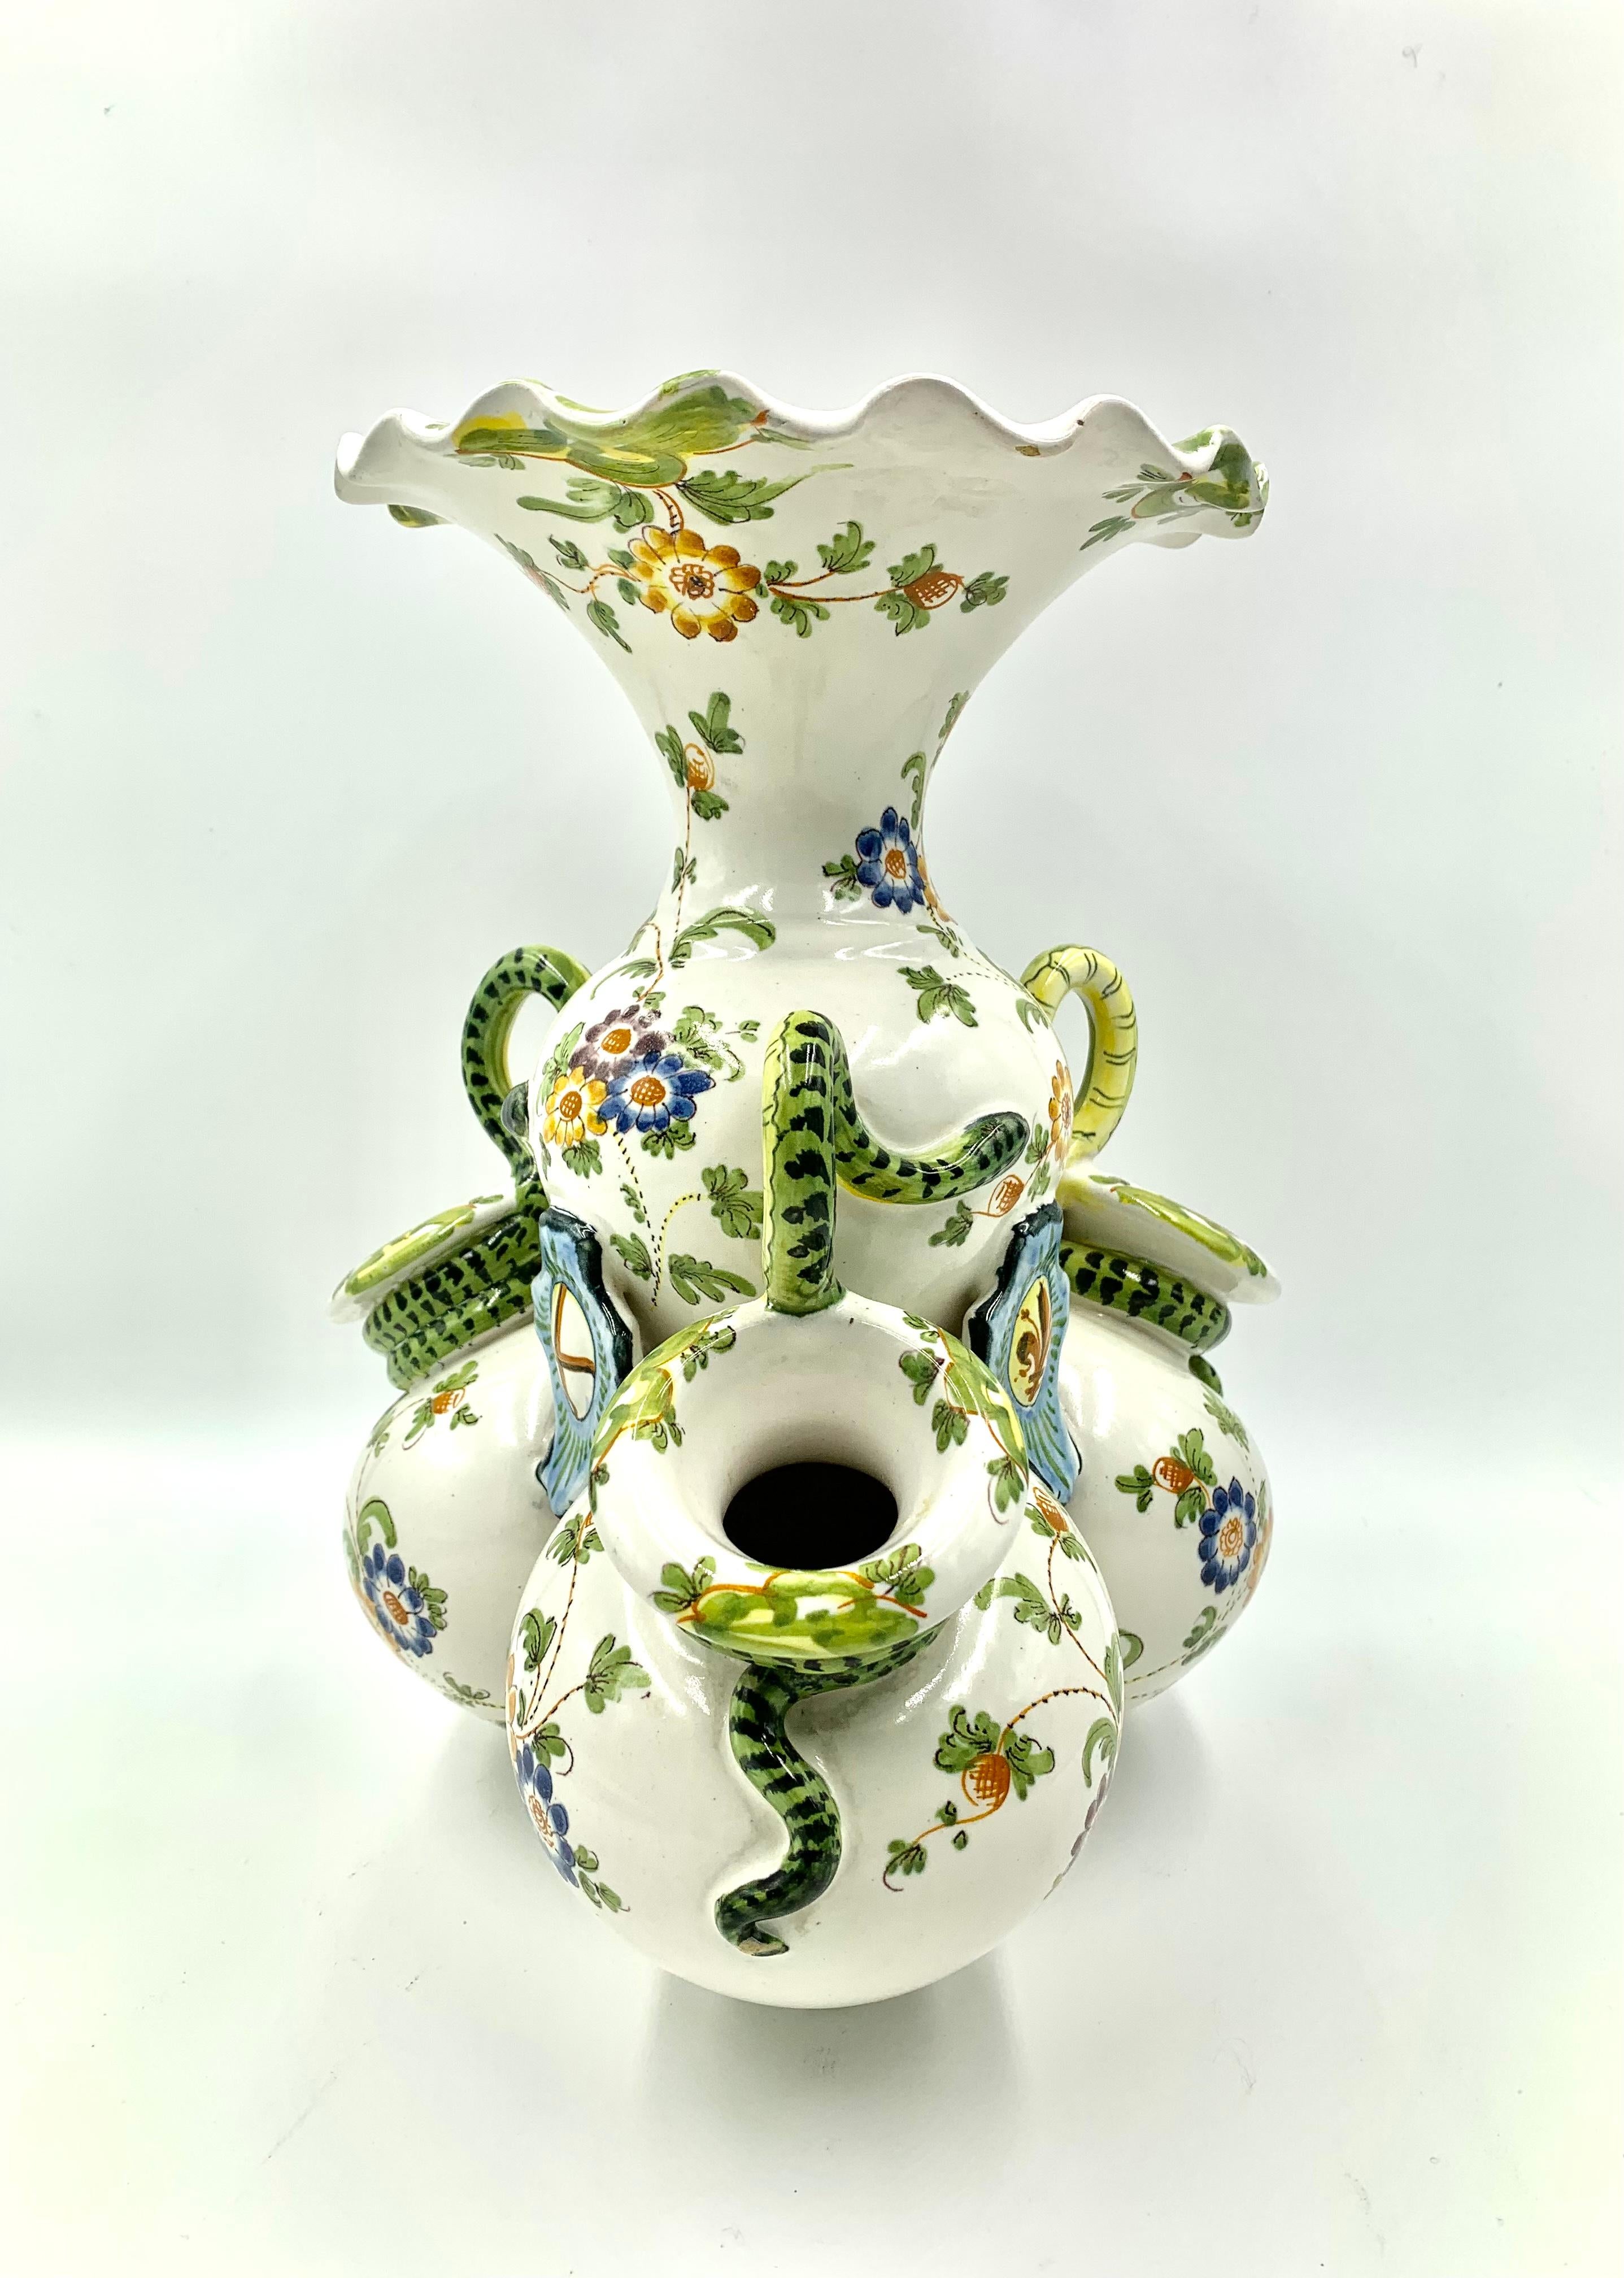 Fabulous antique French Provincial faience Armorial snake handled bough pot vase with three Armorial shields depicting a Fleur-de-Lis, a Cross and a V shaped emblem topped by a large blue circular device. Composed of three lower lever amphora shaped